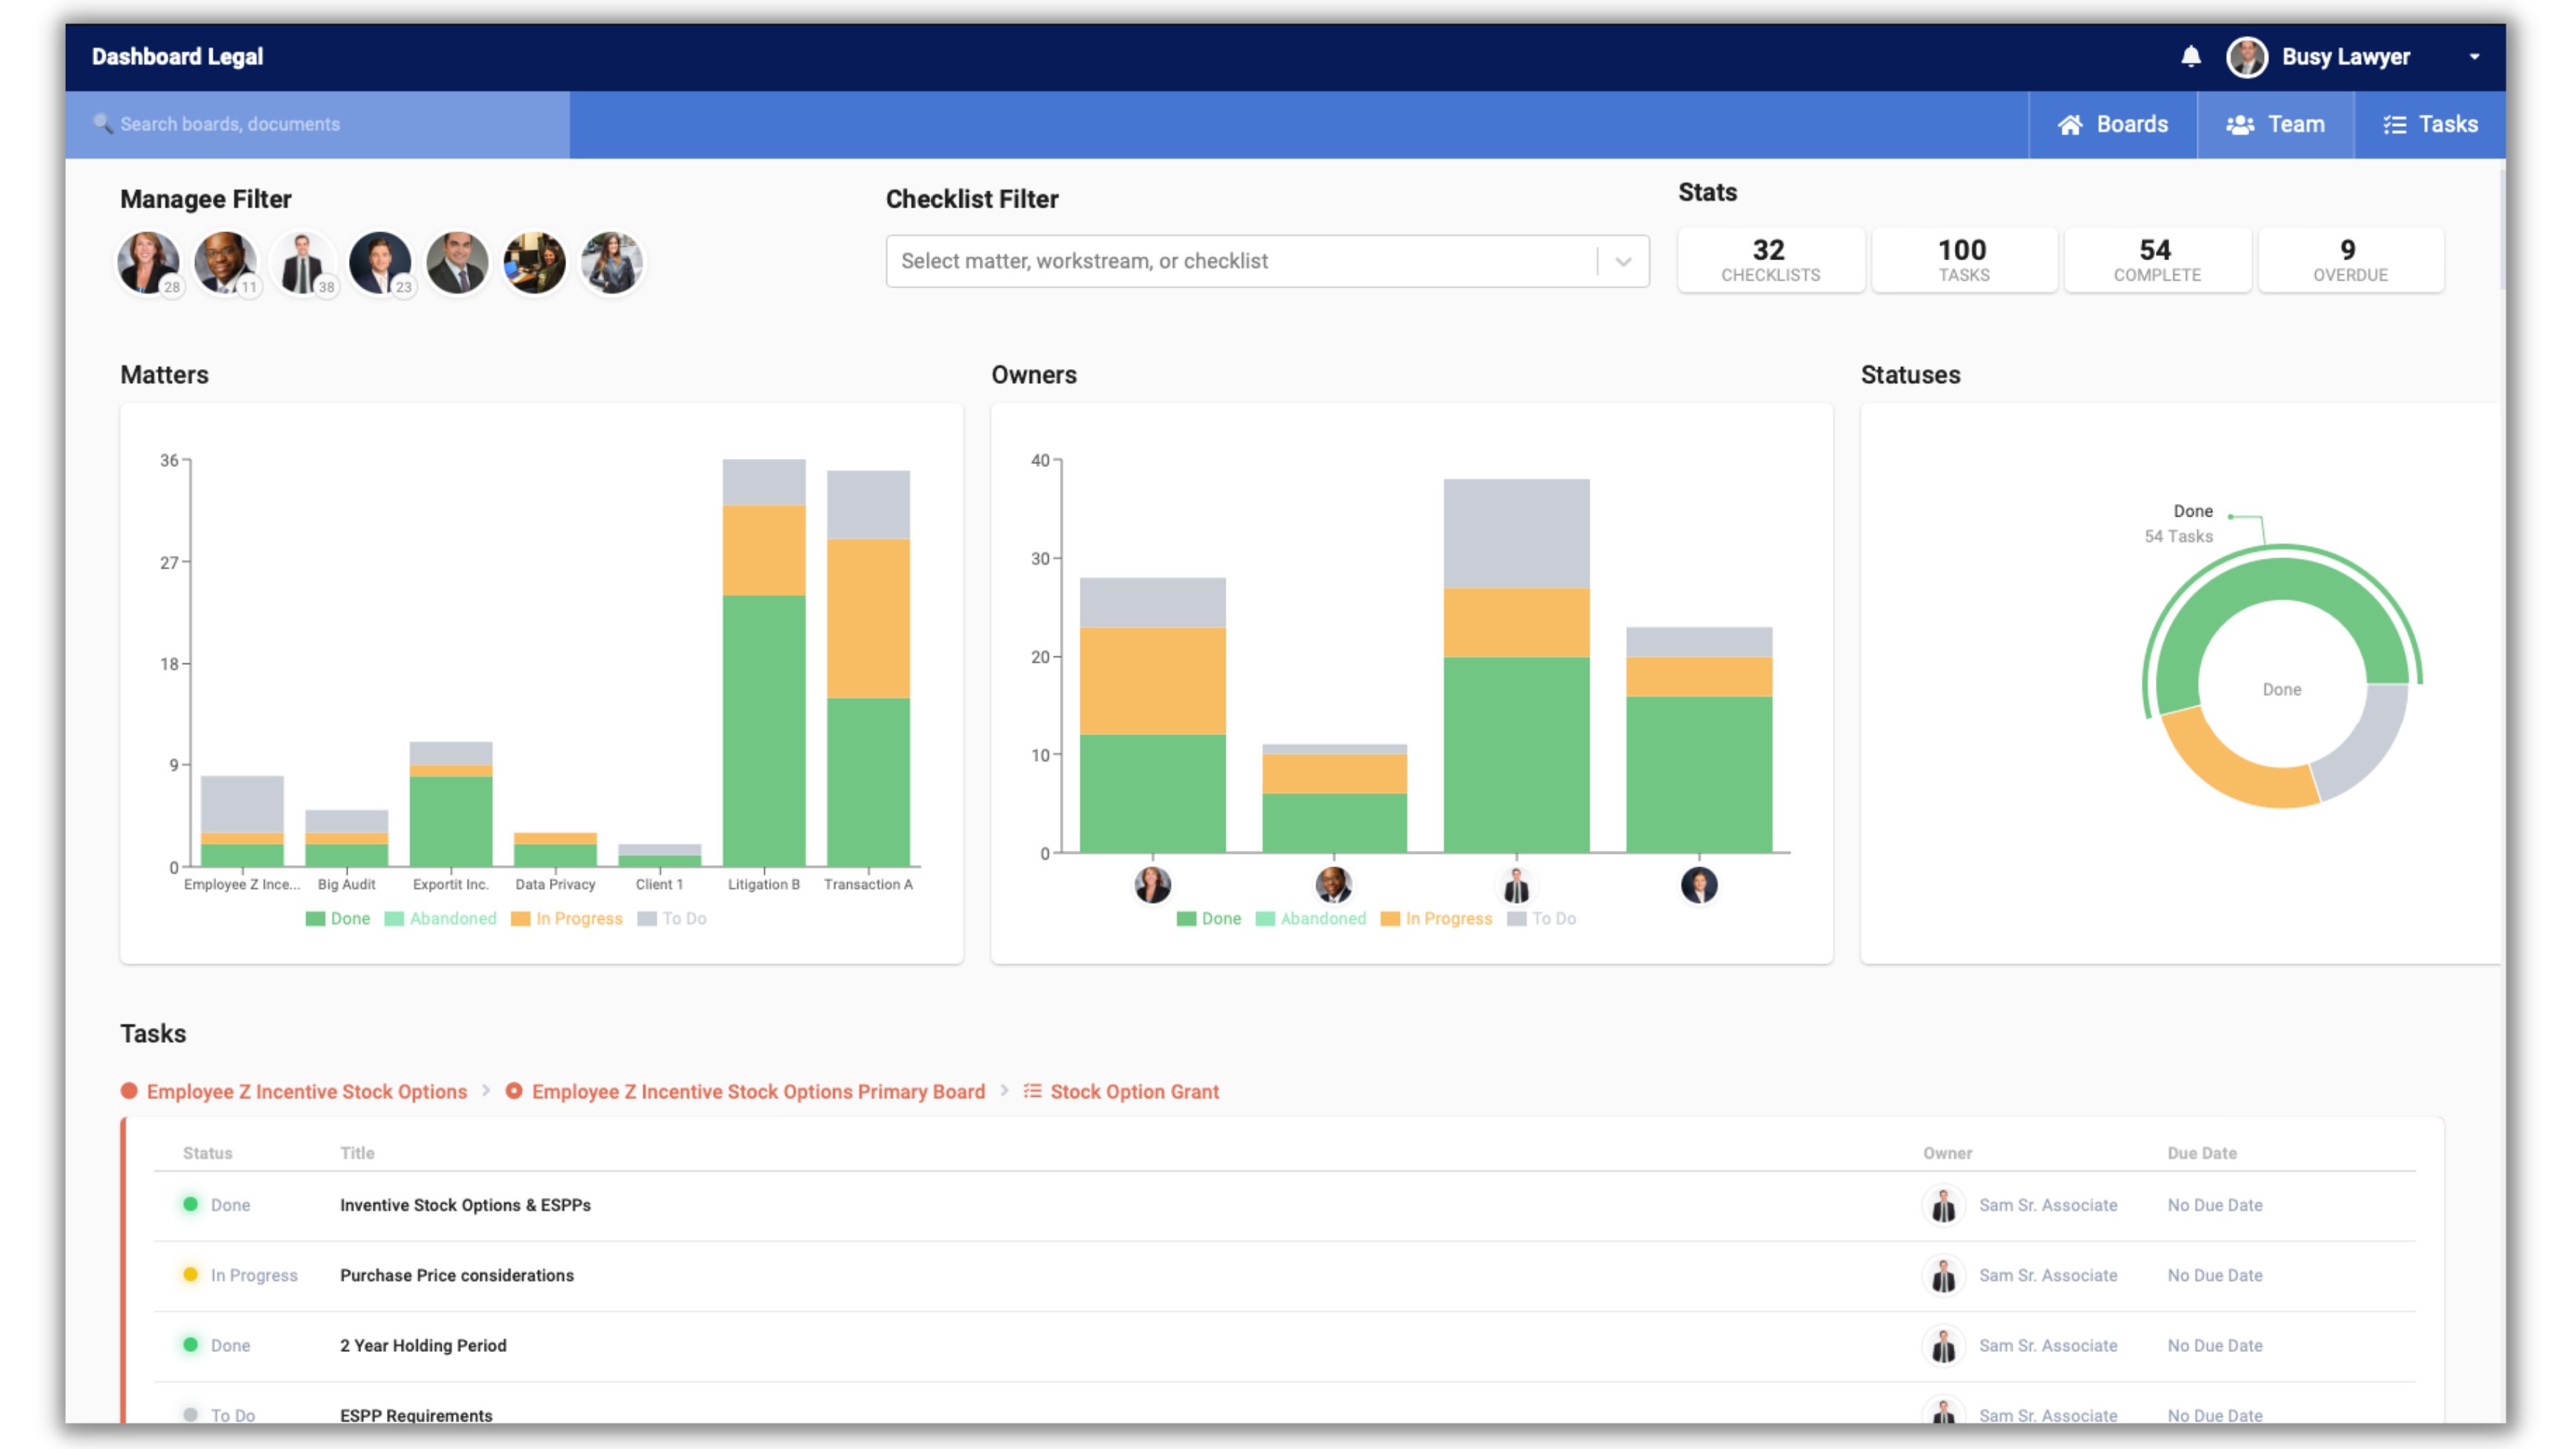 New Dashboard Legal Feature Gives Law Firm Partners A Snapshot View Of All Activity Across Matters and Associates